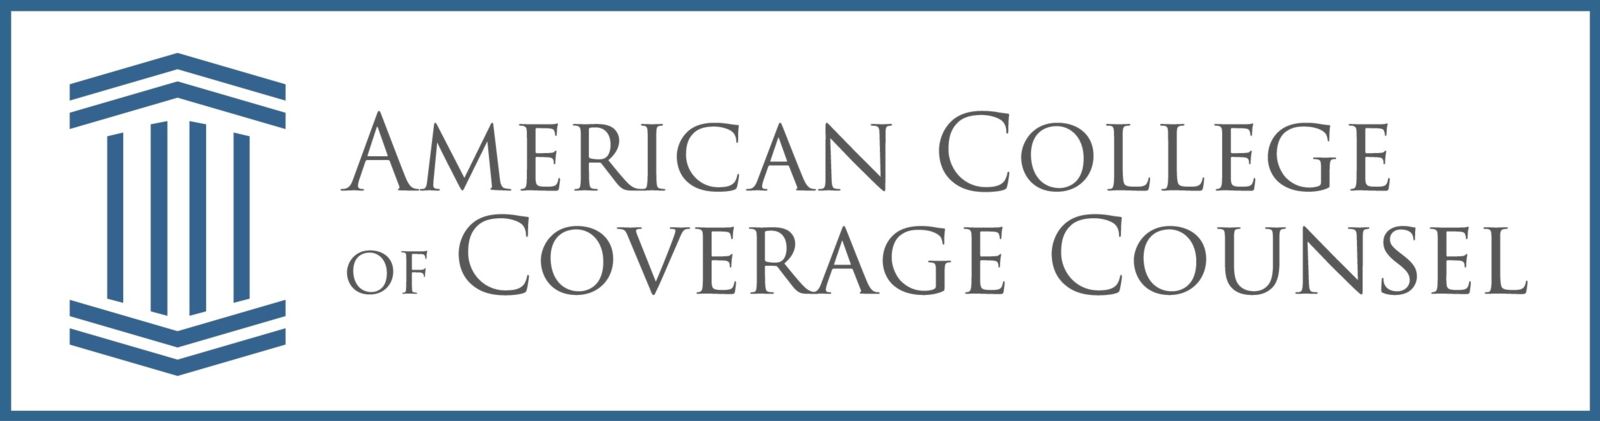 American College of Coverage Counsel logo